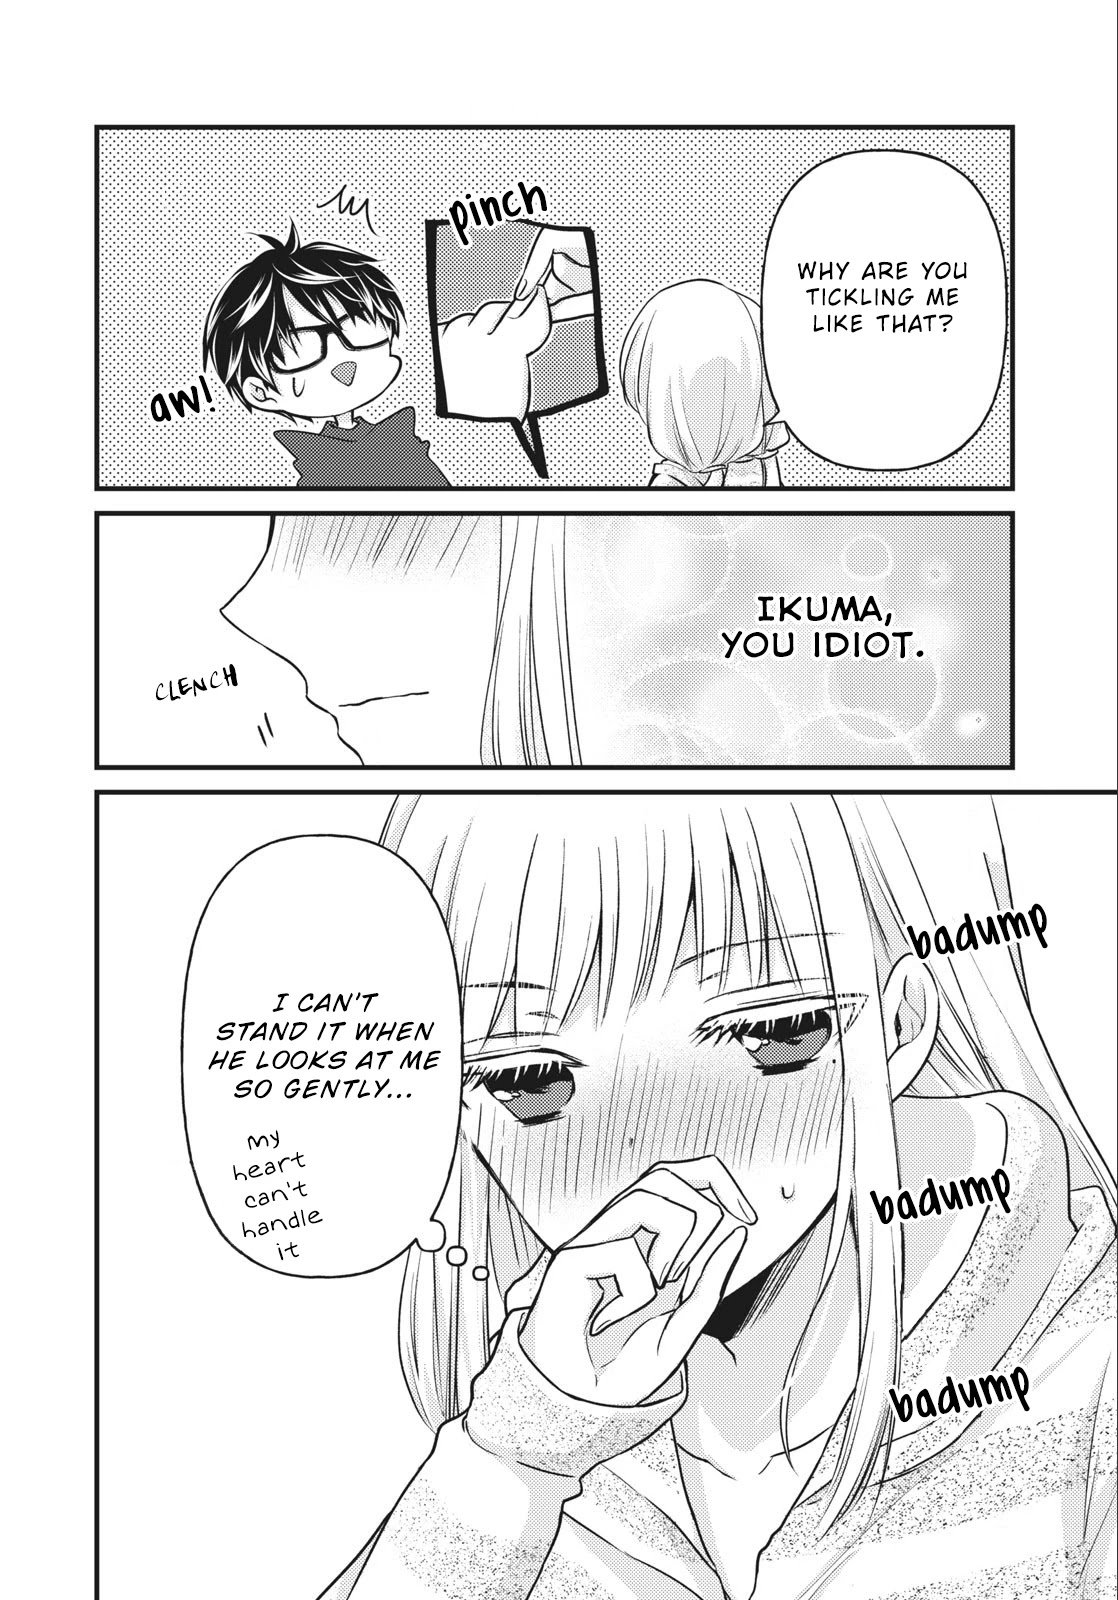 We May Be an Inexperienced Couple but... chapter 74 page 13